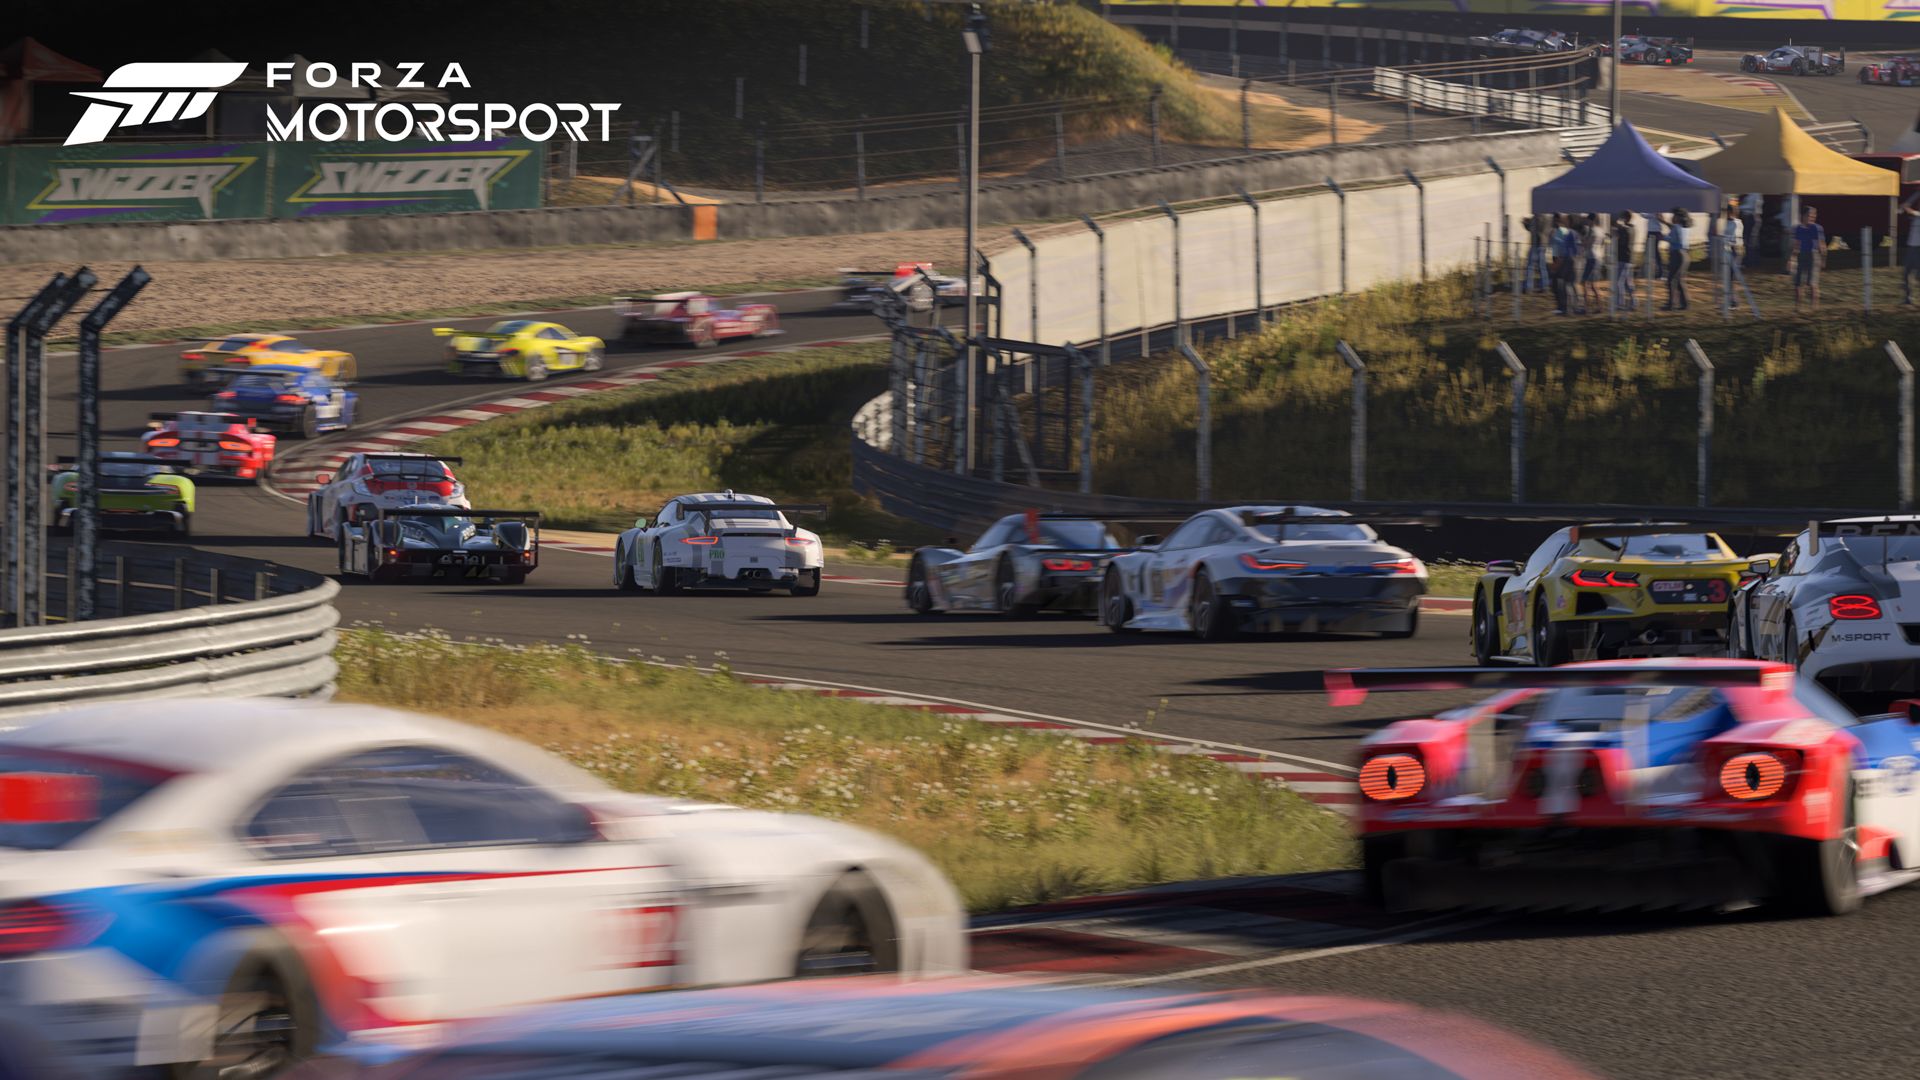 Forza Motorsport Shows off its Opening Races with New Trailer